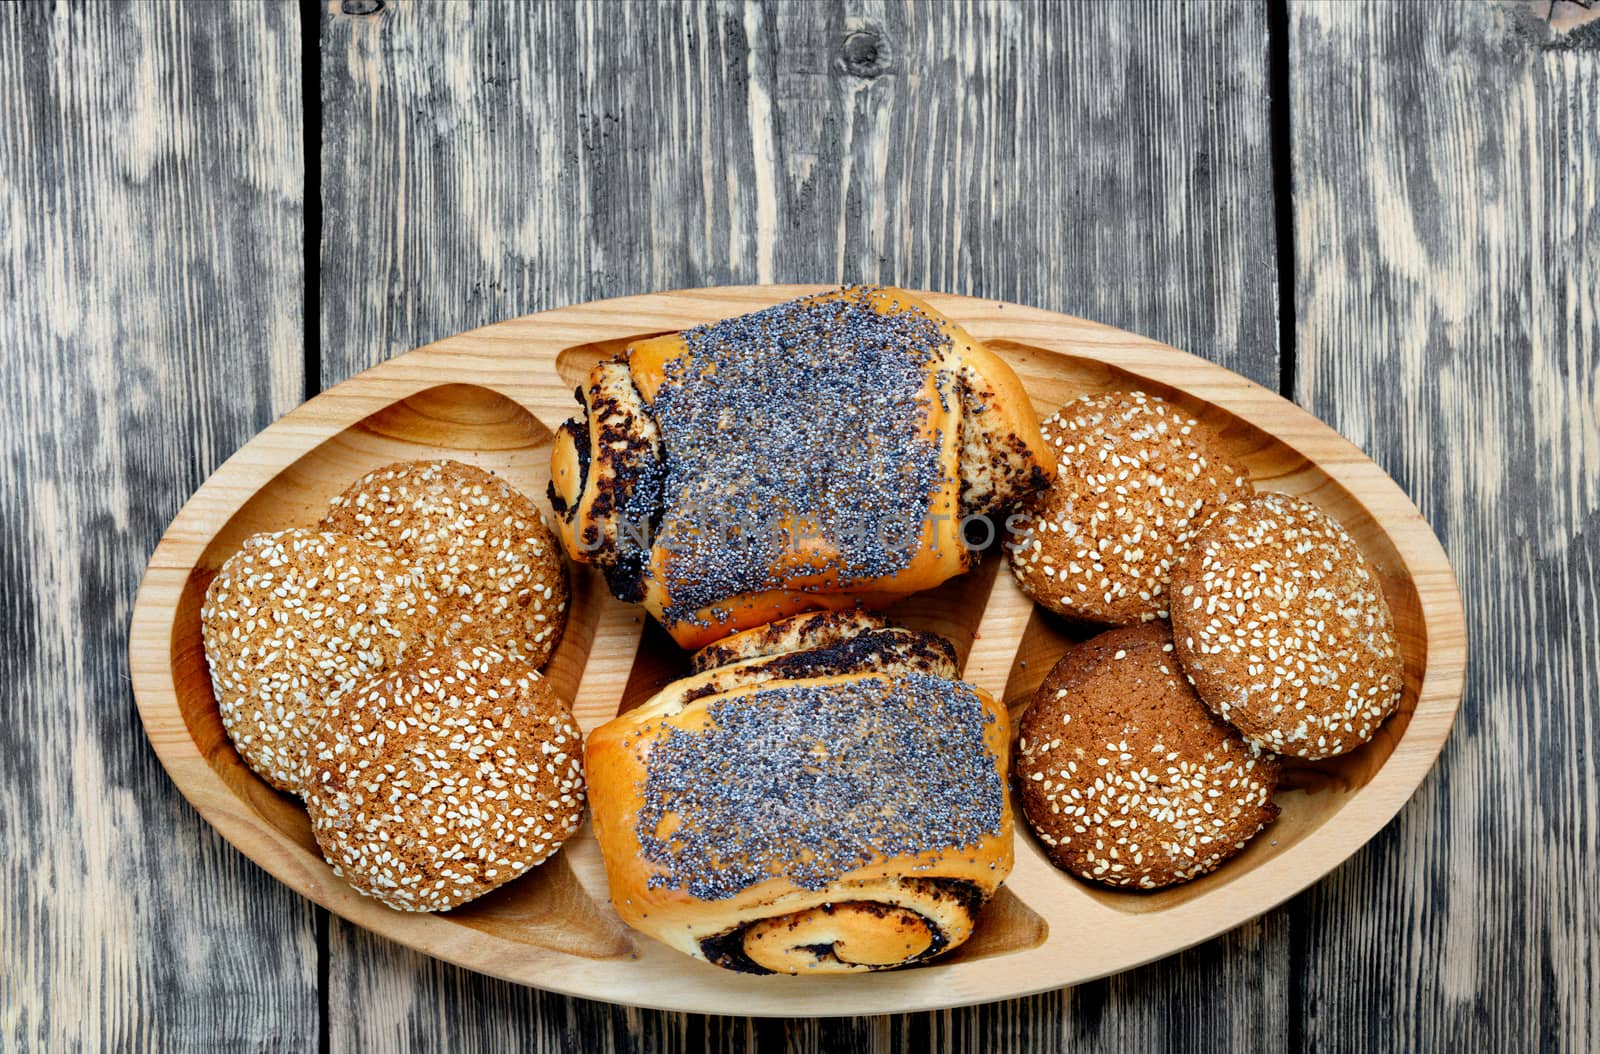 Butter appetizing buns with poppy seeds and sesame cookies on a wooden oval board on an old wooden table, rustic style, copy space.